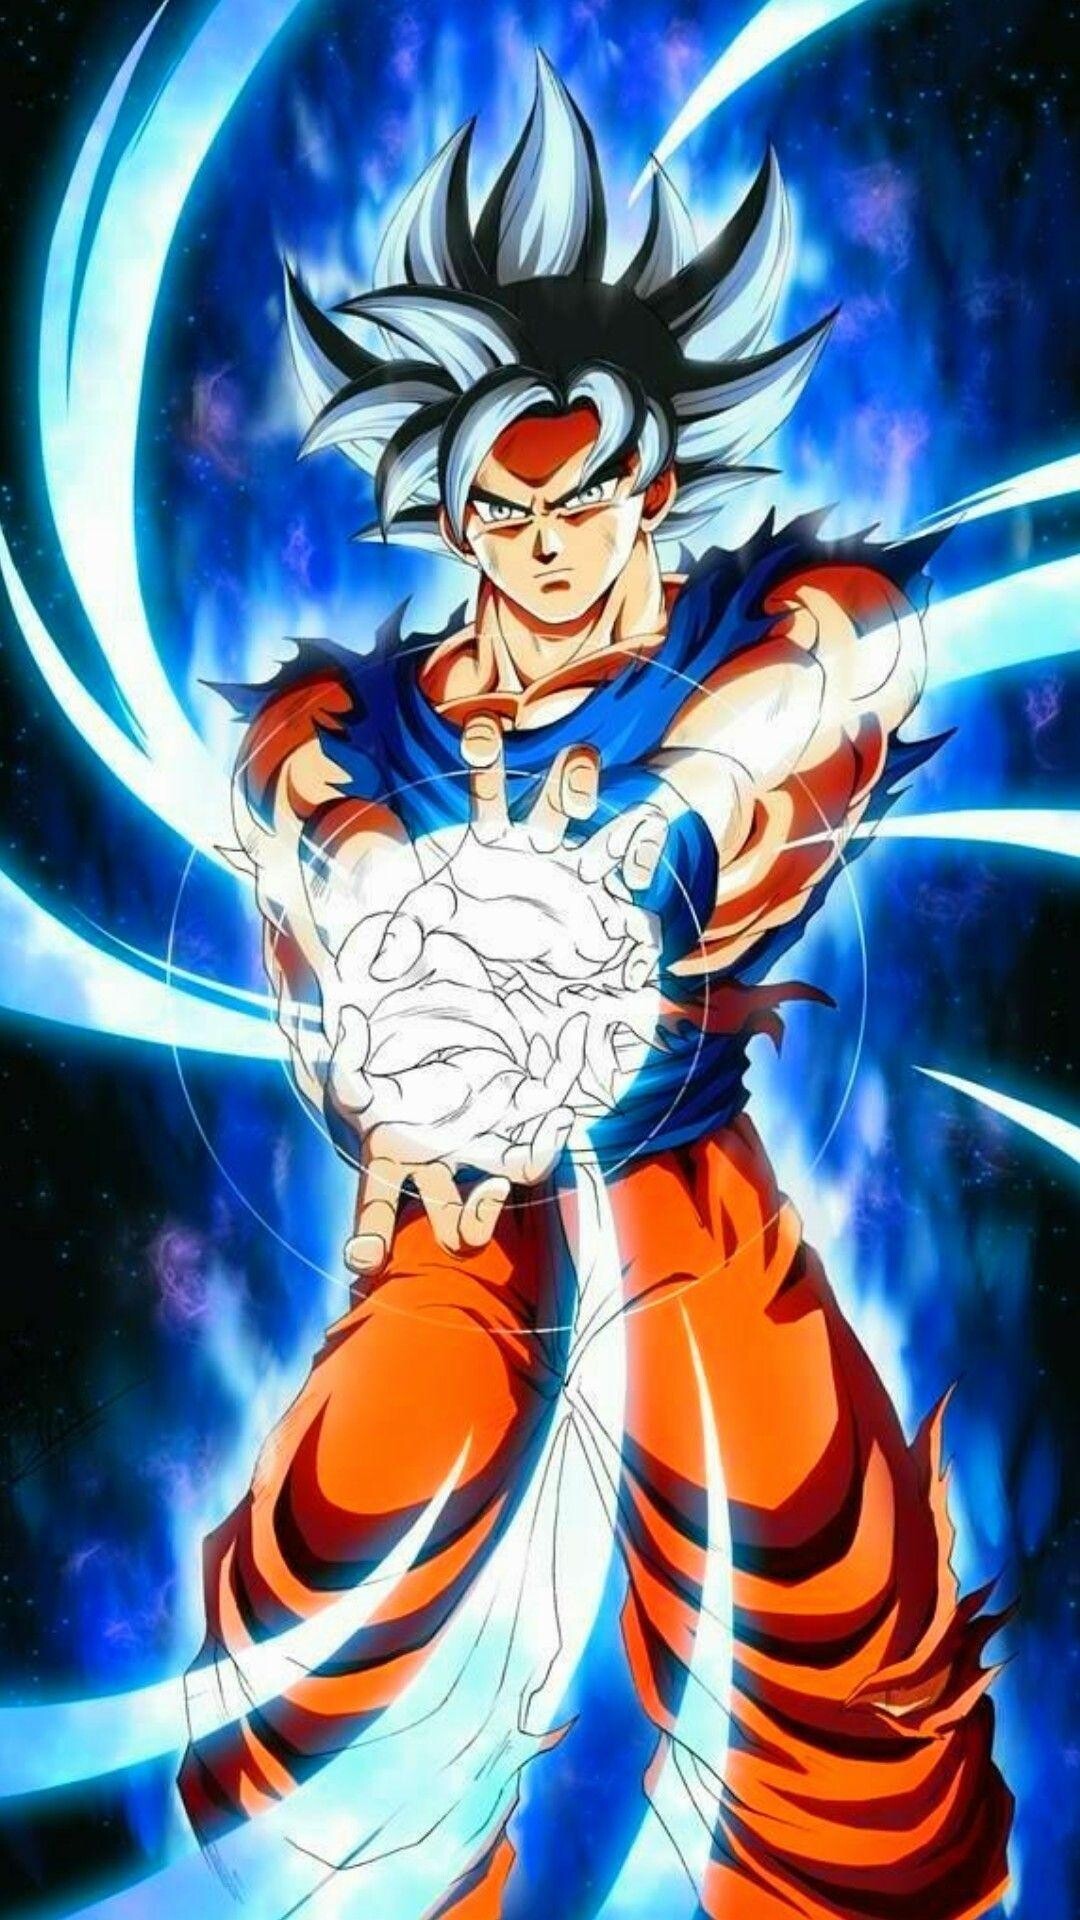 Goku Kamehameha: Concentrating Chi or Ki energy into the ball between the hands, Energy attack, Dragon Ball. 1080x1920 Full HD Background.